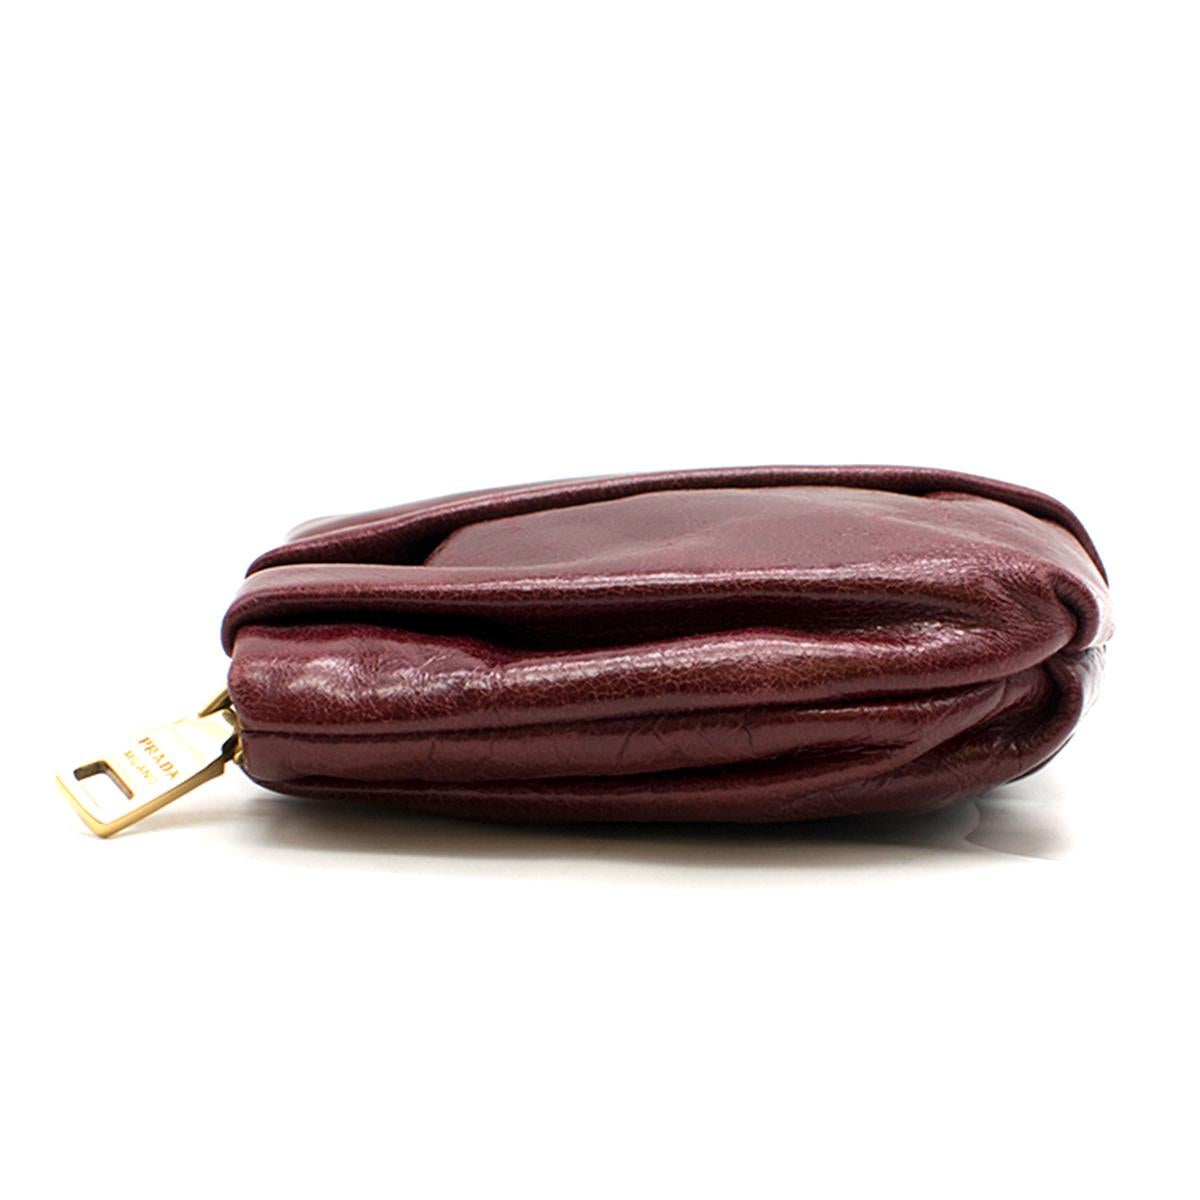 Prada burgundy leather wristlet clutch In Excellent Condition In London, GB